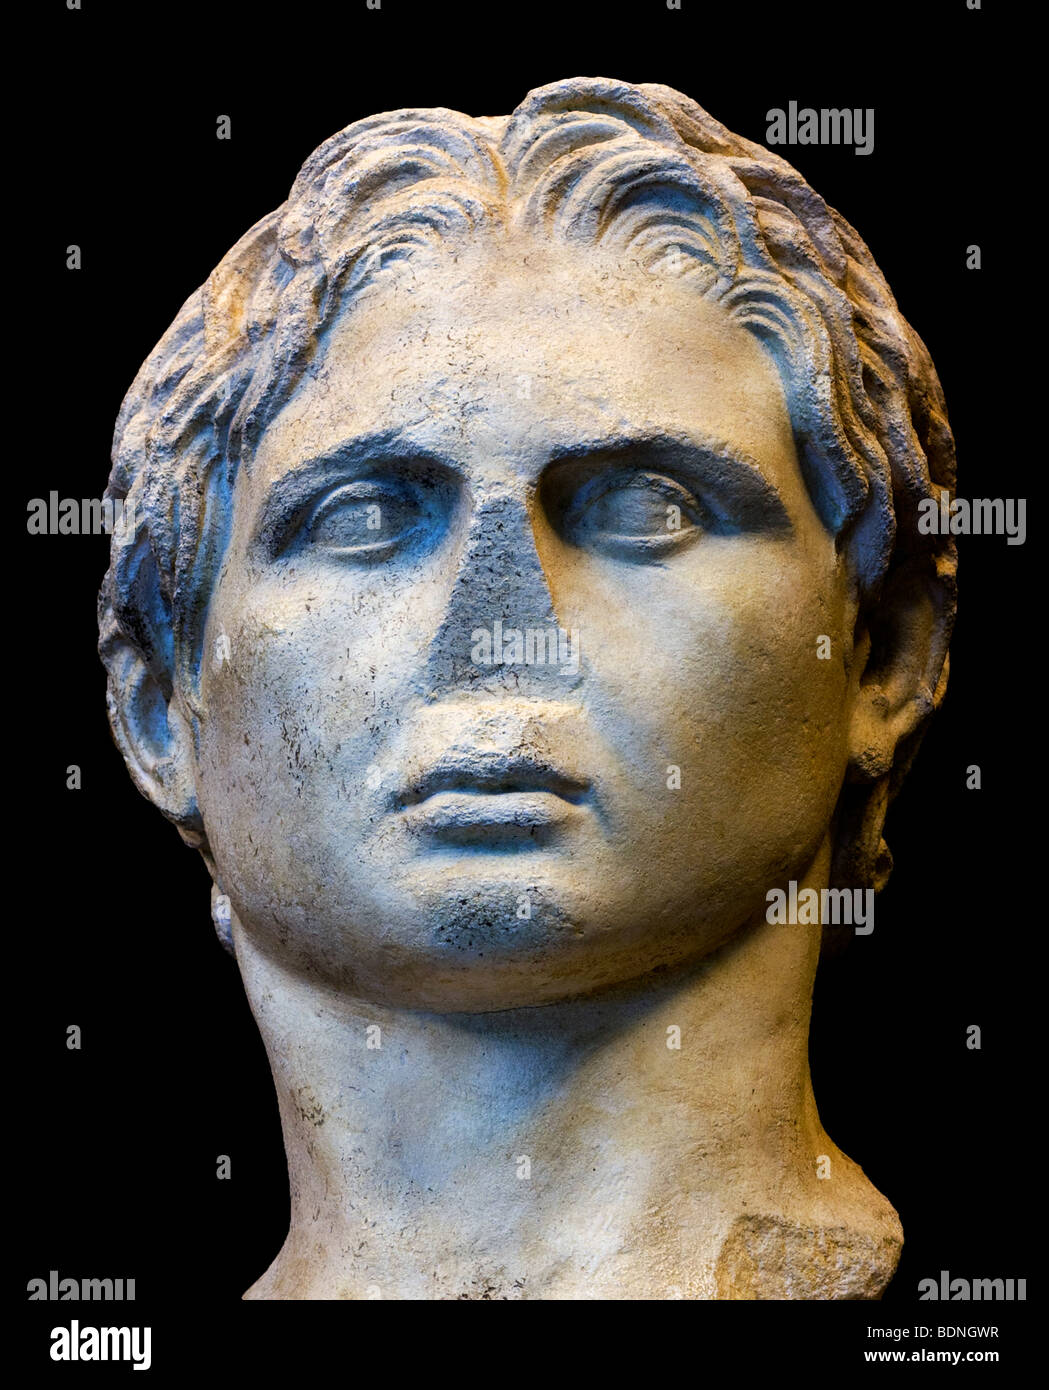 Portrait of Alexander the Great, shown from the approximate vantage point of an ancient viewer. See description for more info. Stock Photo